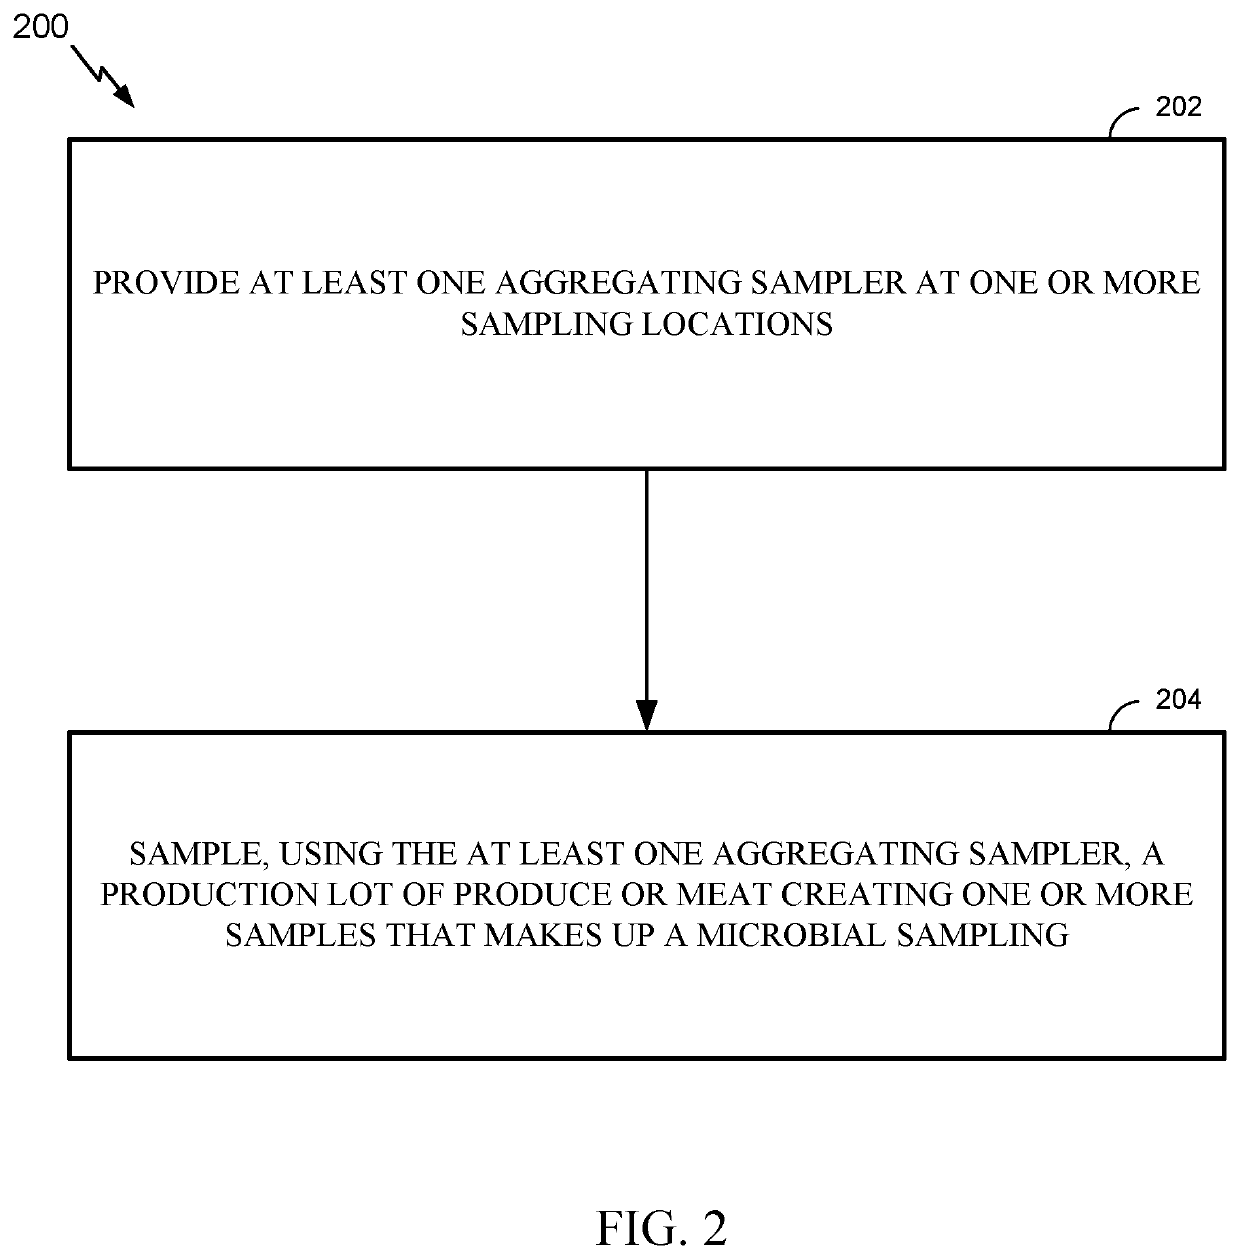 Method and apparatus for applying aggregating sampling to food items